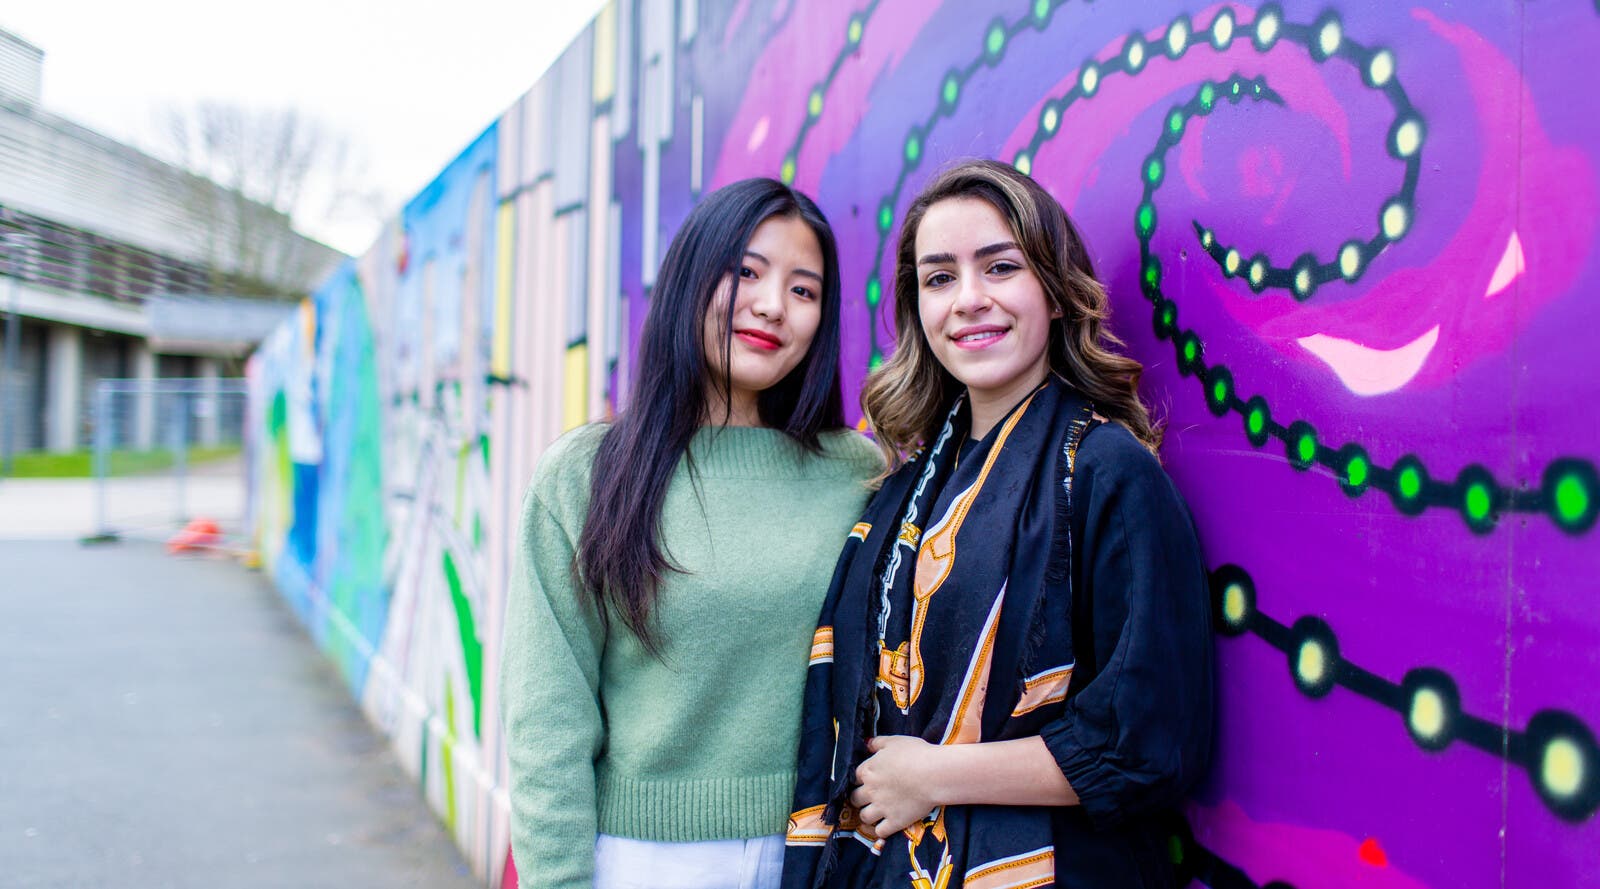 Students smiling and leaning against wall with street art